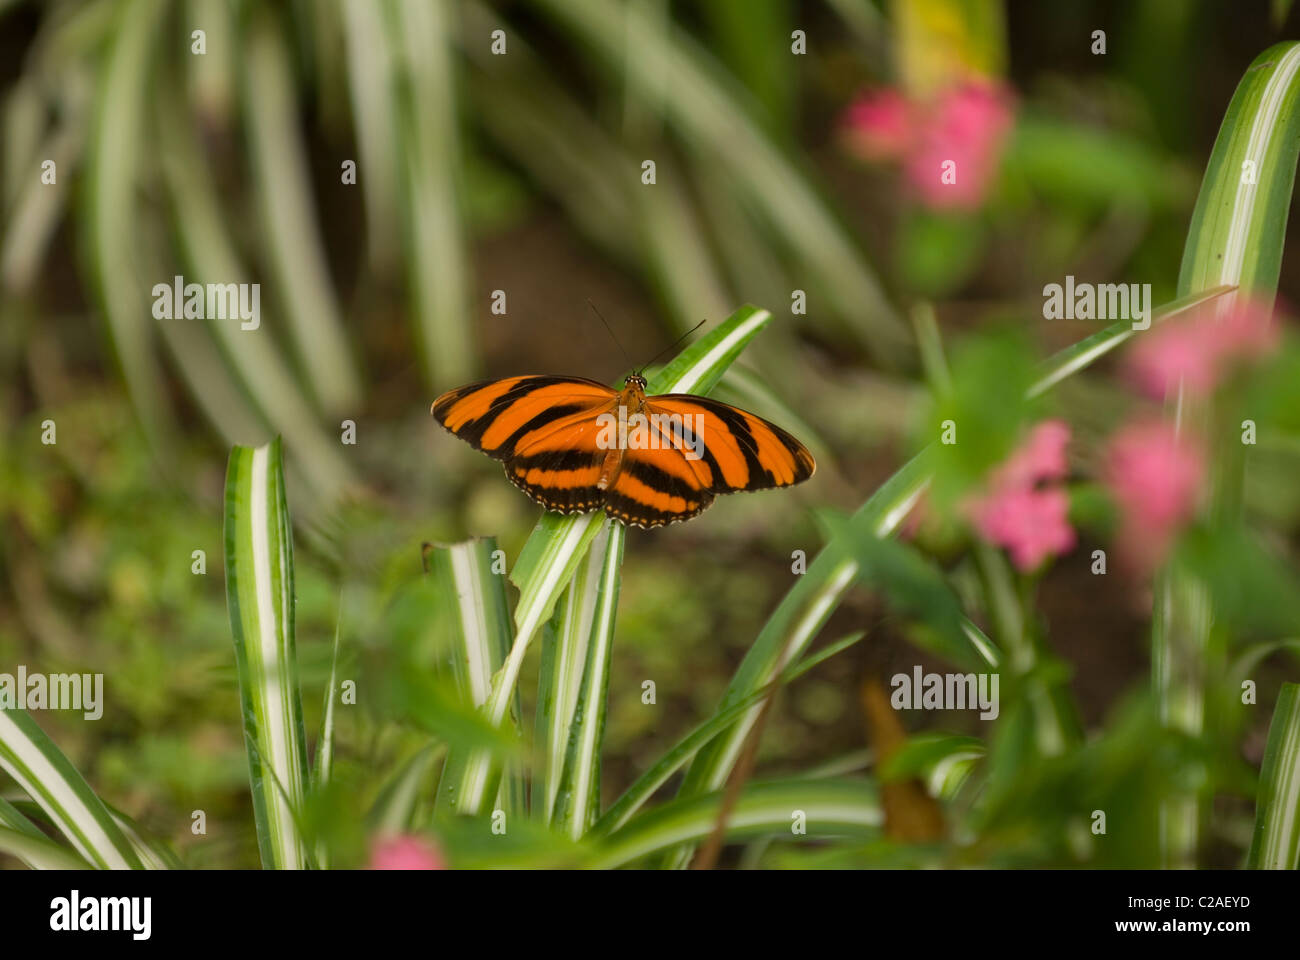 Banded Heliconian butterfly in Costa Rica Stock Photo